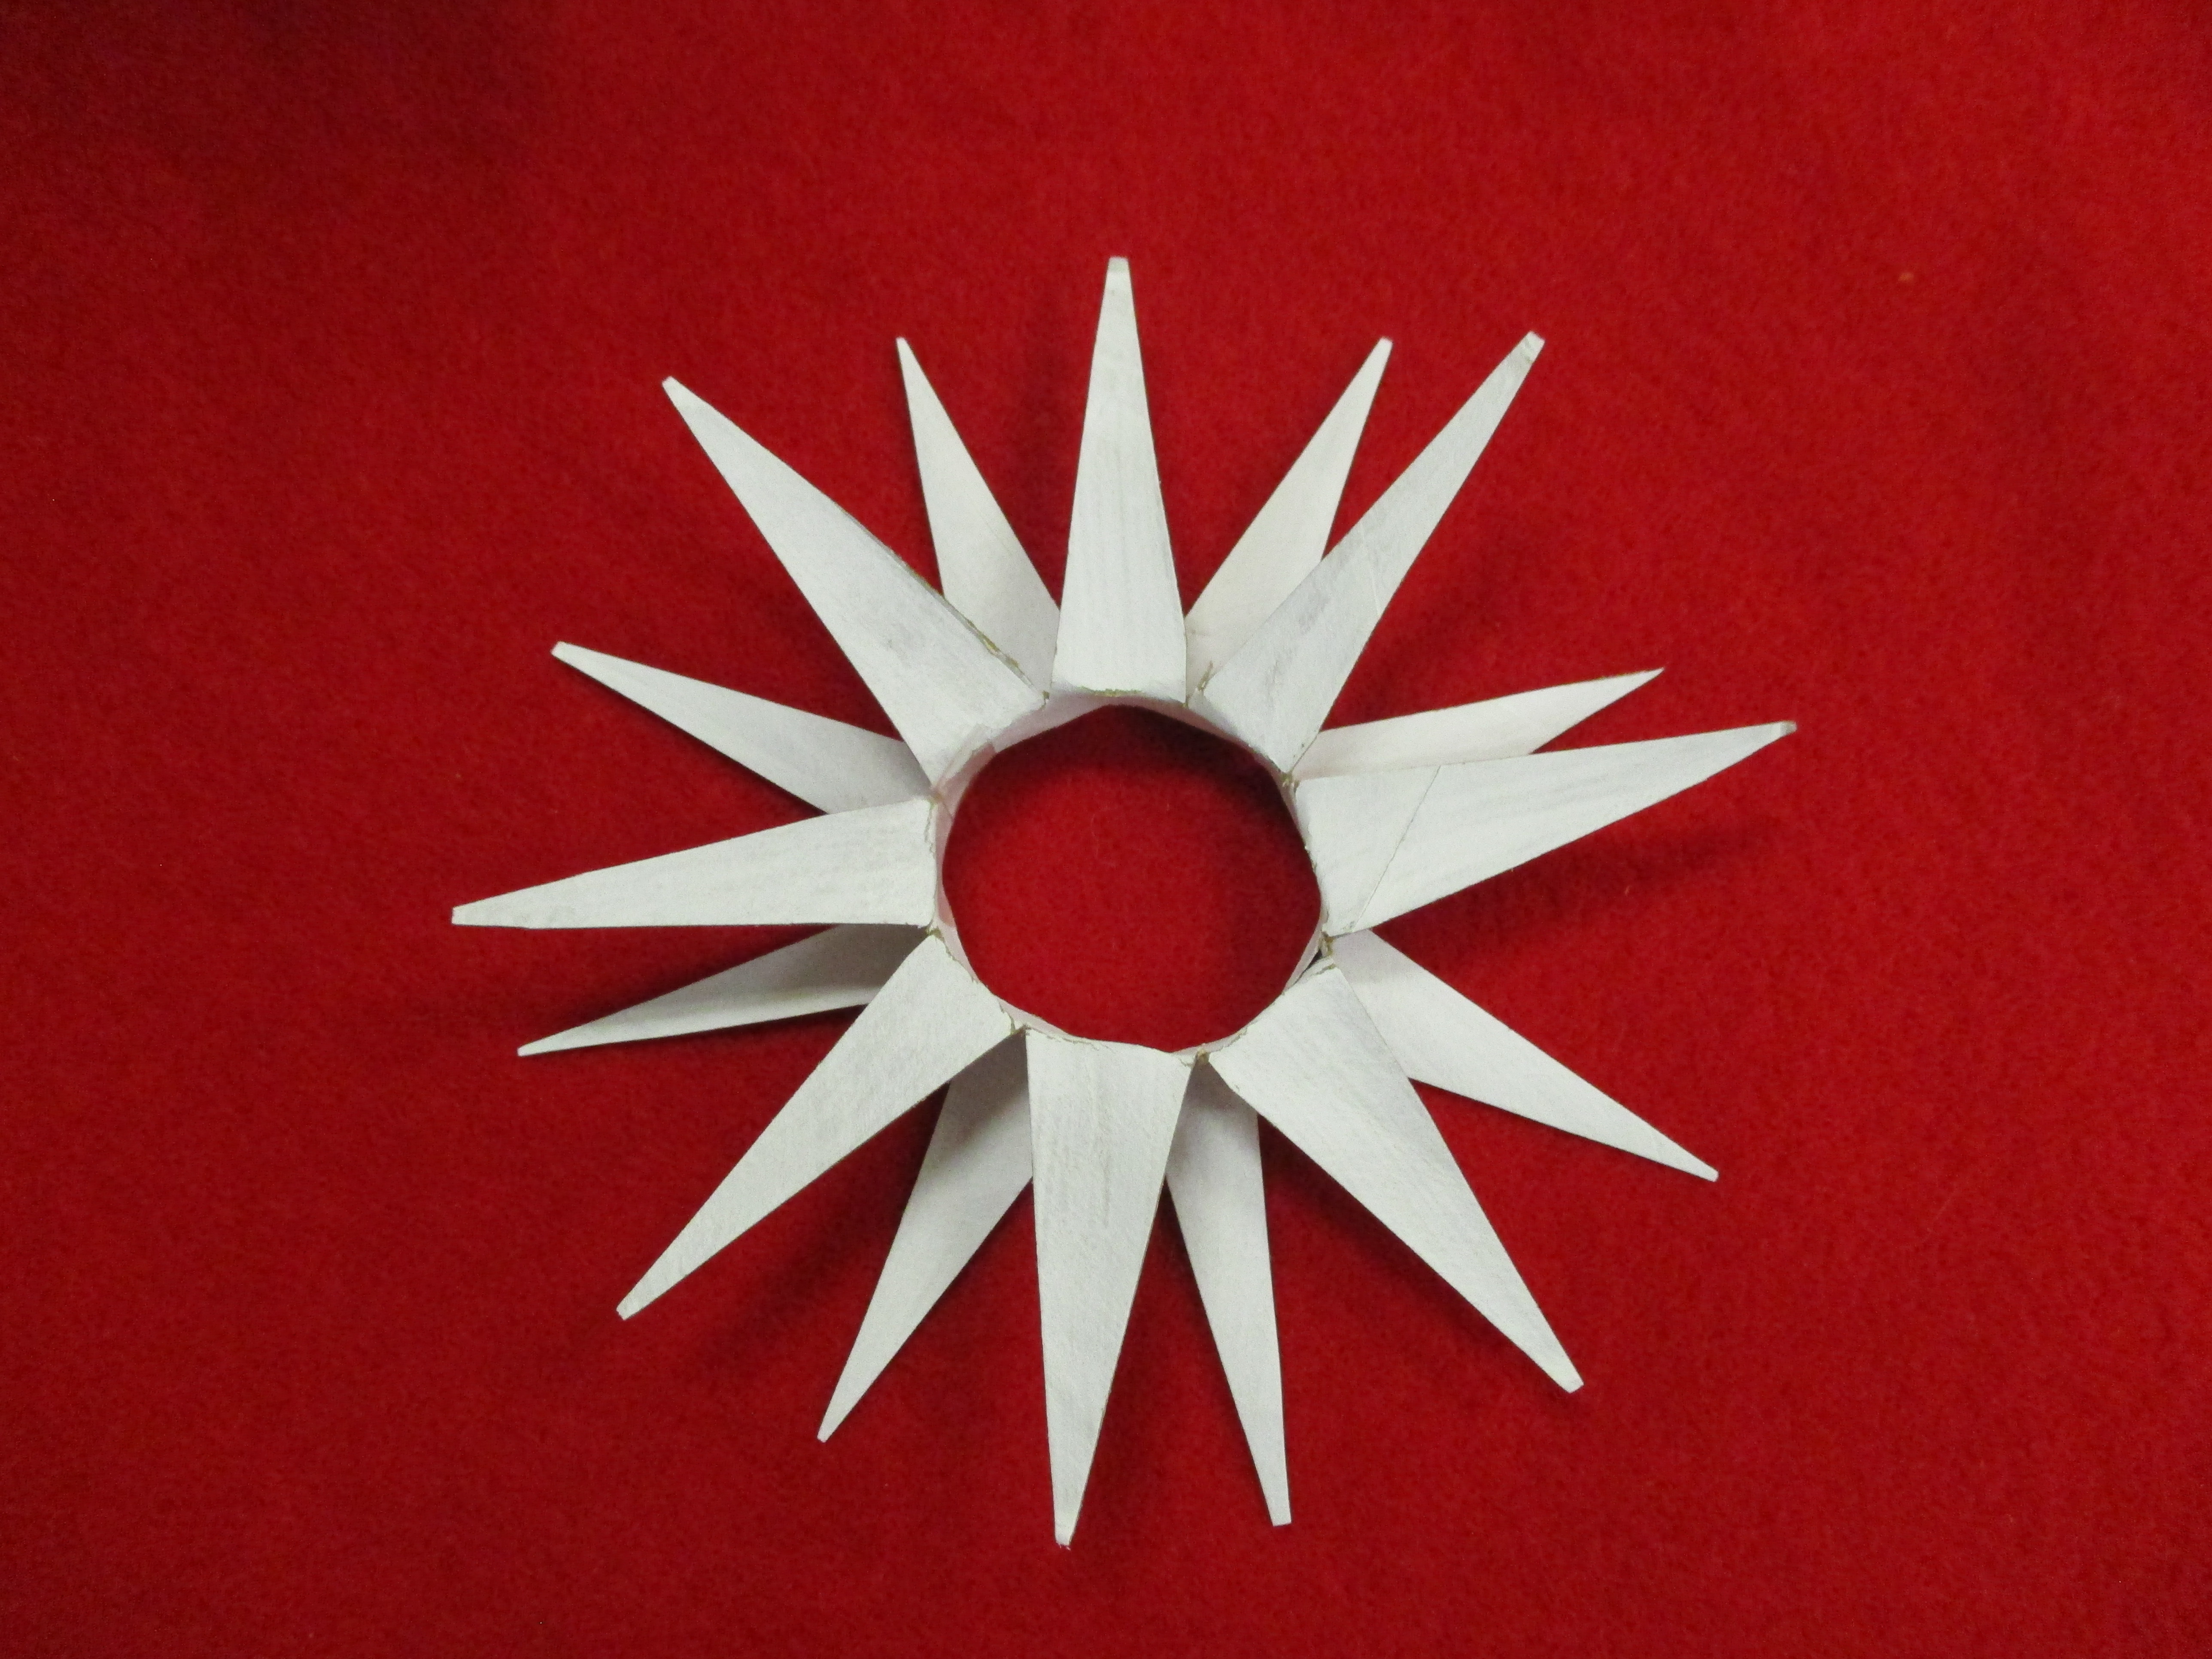 Paper star on a red background.